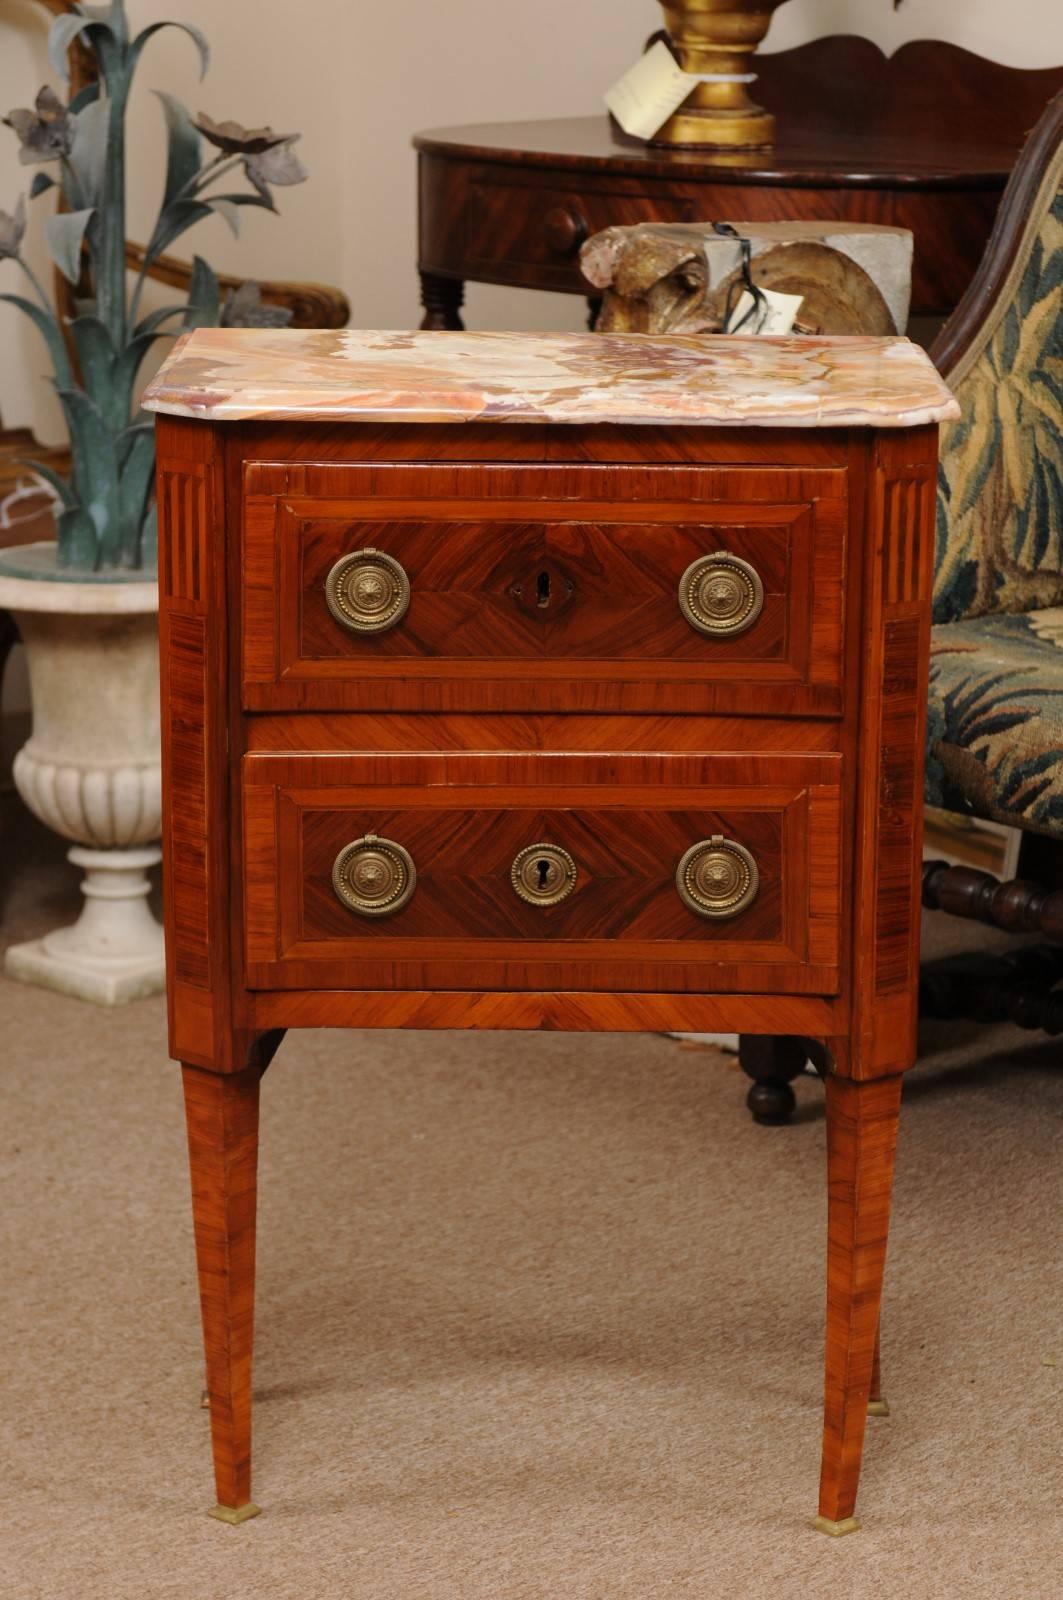 The Louis XVI inlaid petite commode in kingwood with onyx top, two drawers with brass ring pulls, canted corners and tapered legs.